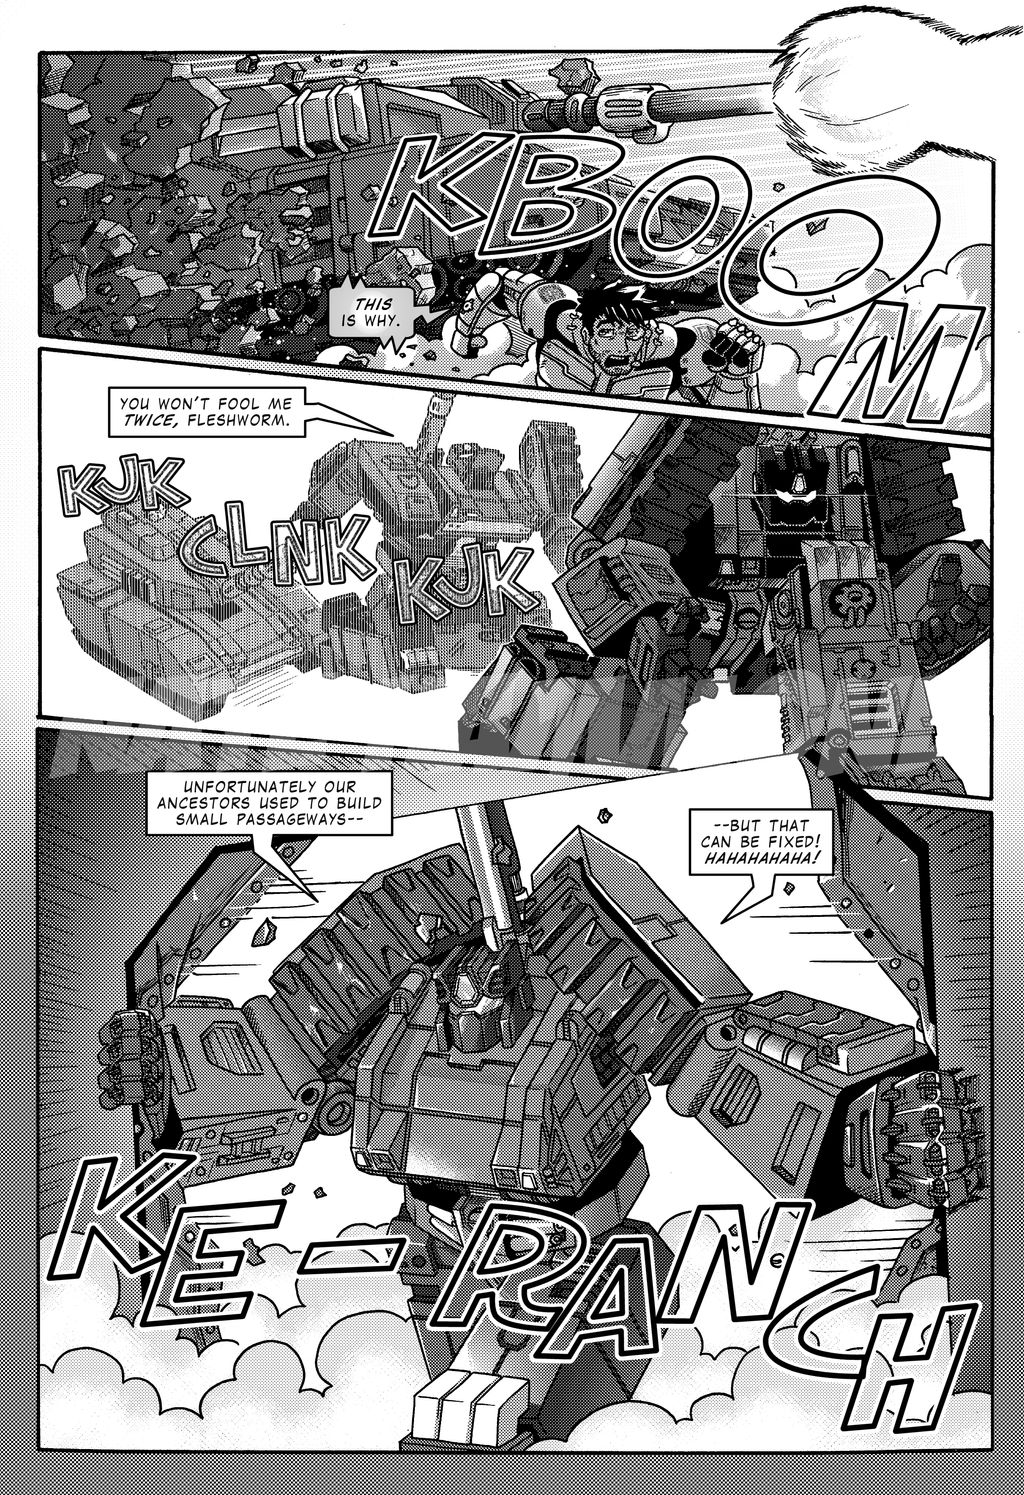 WARBOTRON issue 3, page 7